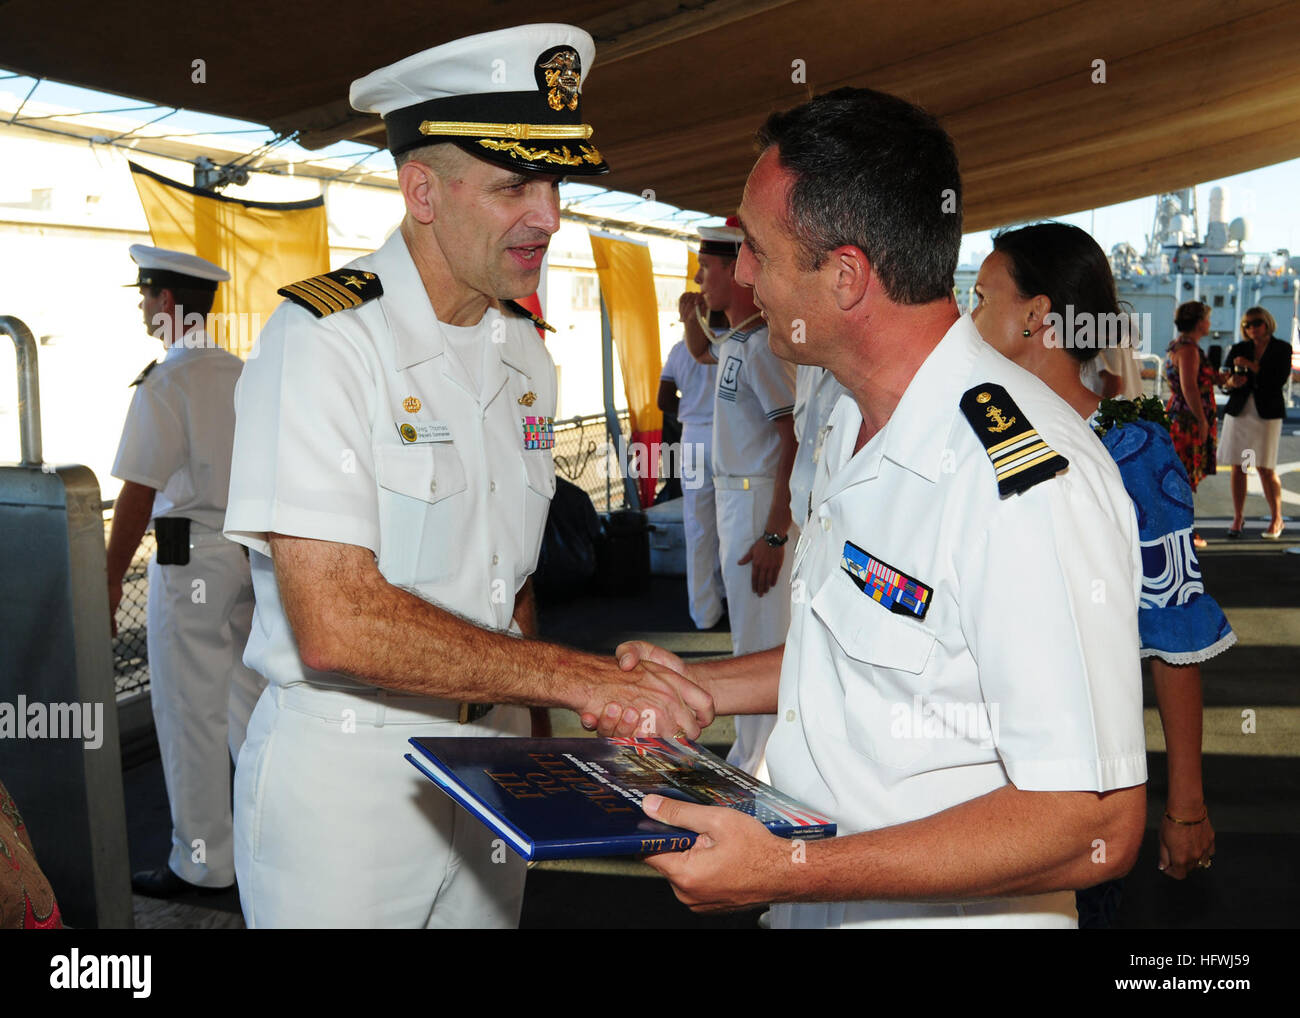 100630-N-3570S-031 PEARL HARBOR (June 30, 2010) Capt. Gregory R. Thomas, commander of Pearl Harbor Naval Shipyard, presents French navy Cmdr. Renaud Bondil, commanding officer of the French navy frigate Prairial (F 731), with a book of Pearl Harbor during the Rim of the Pacific (RIMPAC) 2010 French reception. RIMPAC is a biennial, multinational exercise designed to strengthen regional partnerships and improve interoperability. (U.S. Navy photo by Mass Communication Specialist 2nd Class Jeremy M. Starr/Released) US Navy 100630-N-3570S-031 Capt. Gregory R. Thomas presents French navy Cmdr. Renau Stock Photo